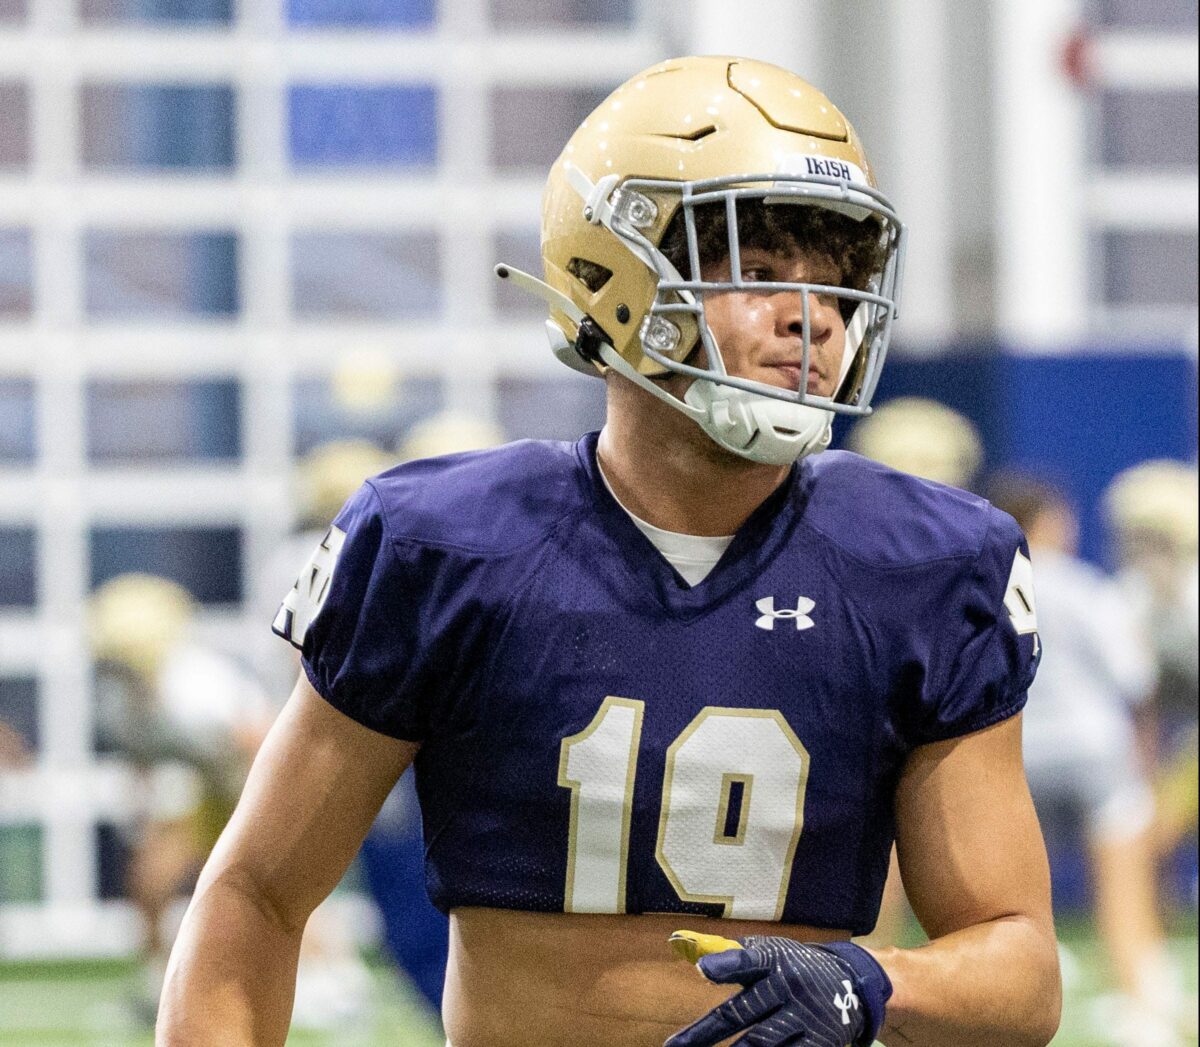 247Sports thinks this Notre Dame player created a lot of buzz during the spring